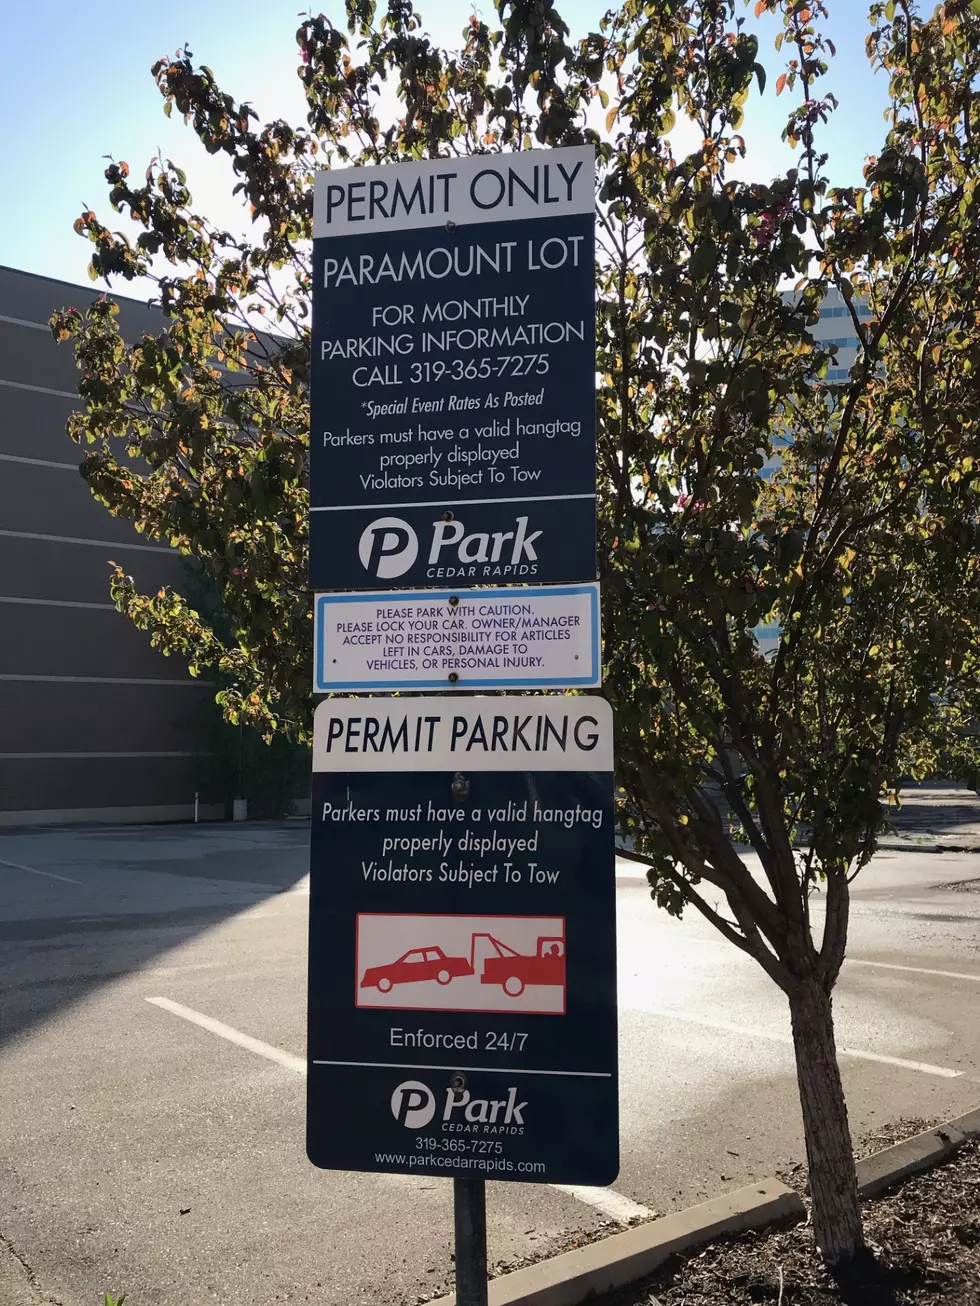 New Cedar Rapids Resident Has Thoughts About Paying to Park